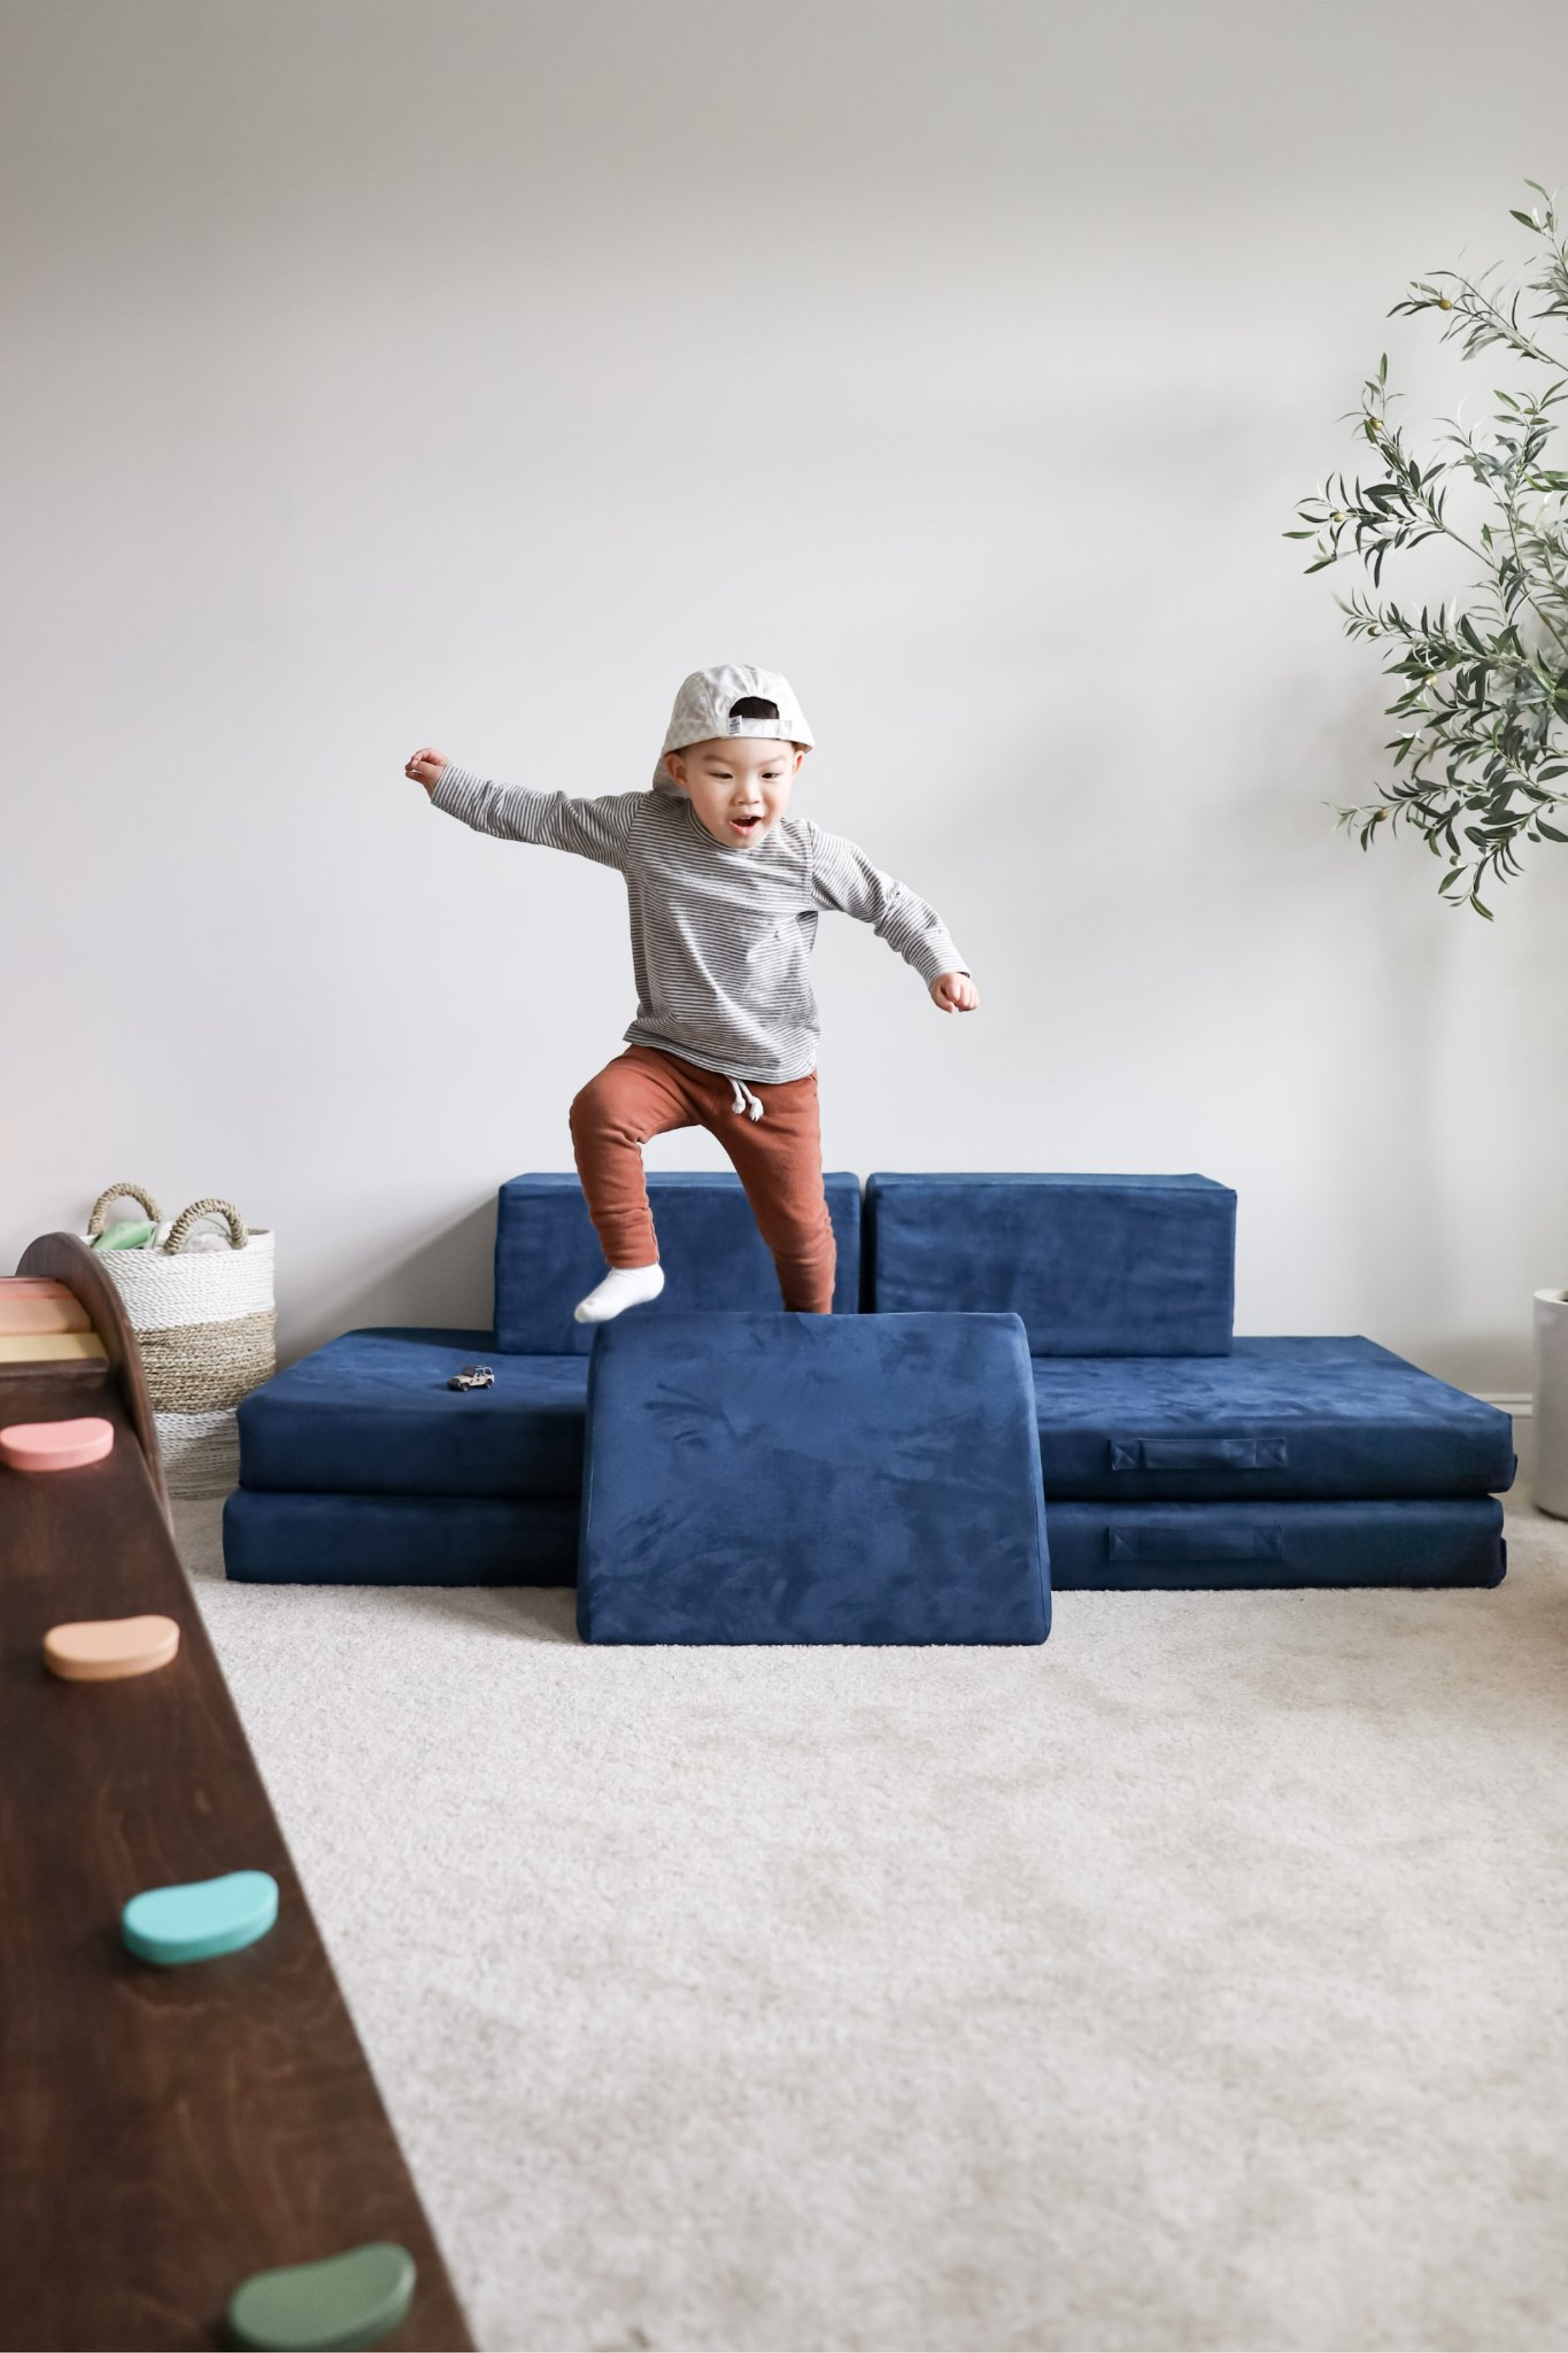 Child jumping on Play couch